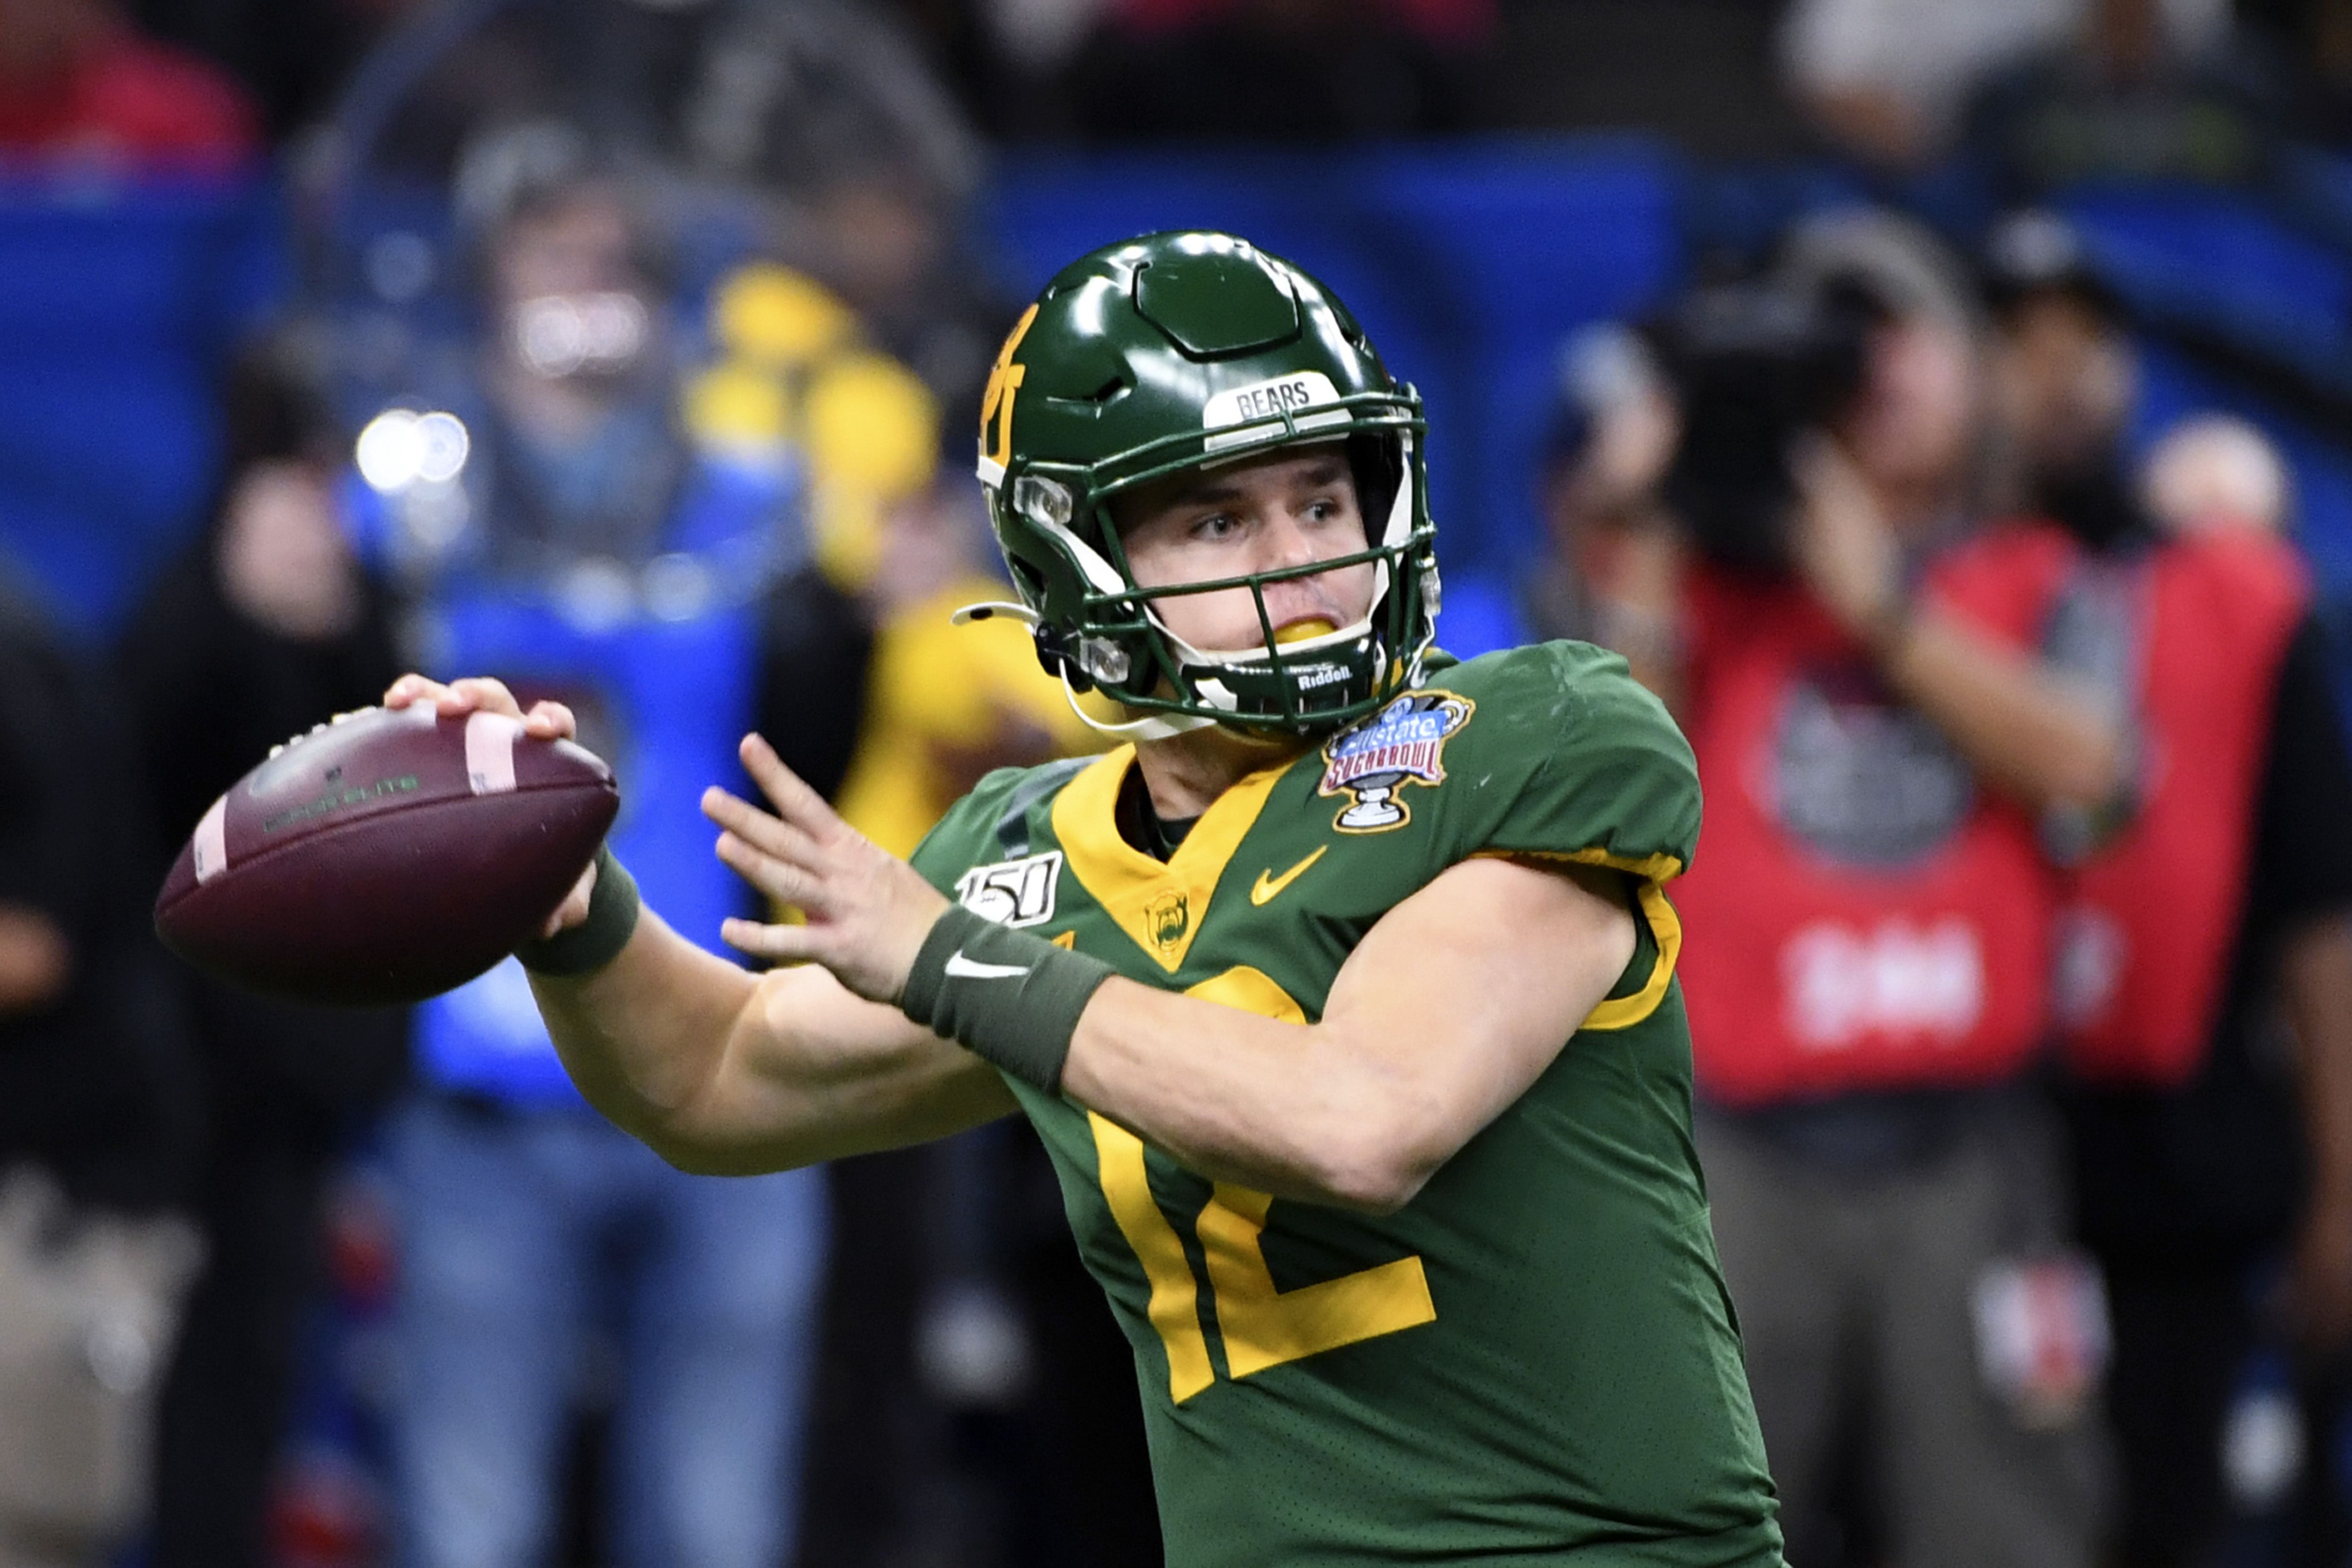 After suffering another scary hit, is it time for Baylor's Charlie Brewer  to consider retiring from football?